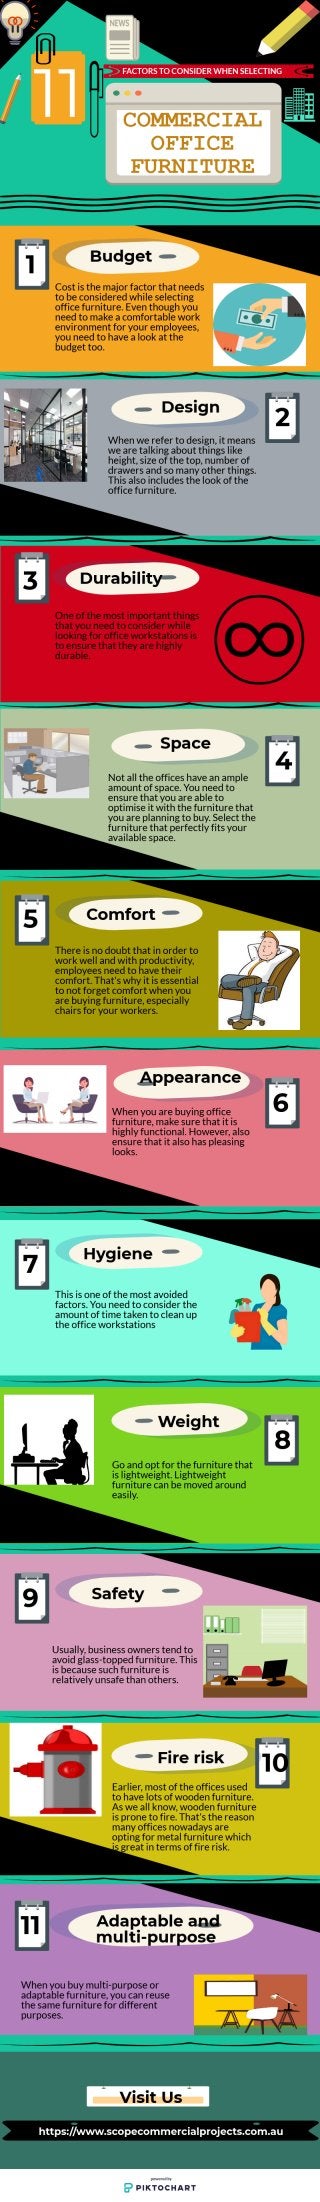 11 factors to consider when selecting office furniture -  infographic